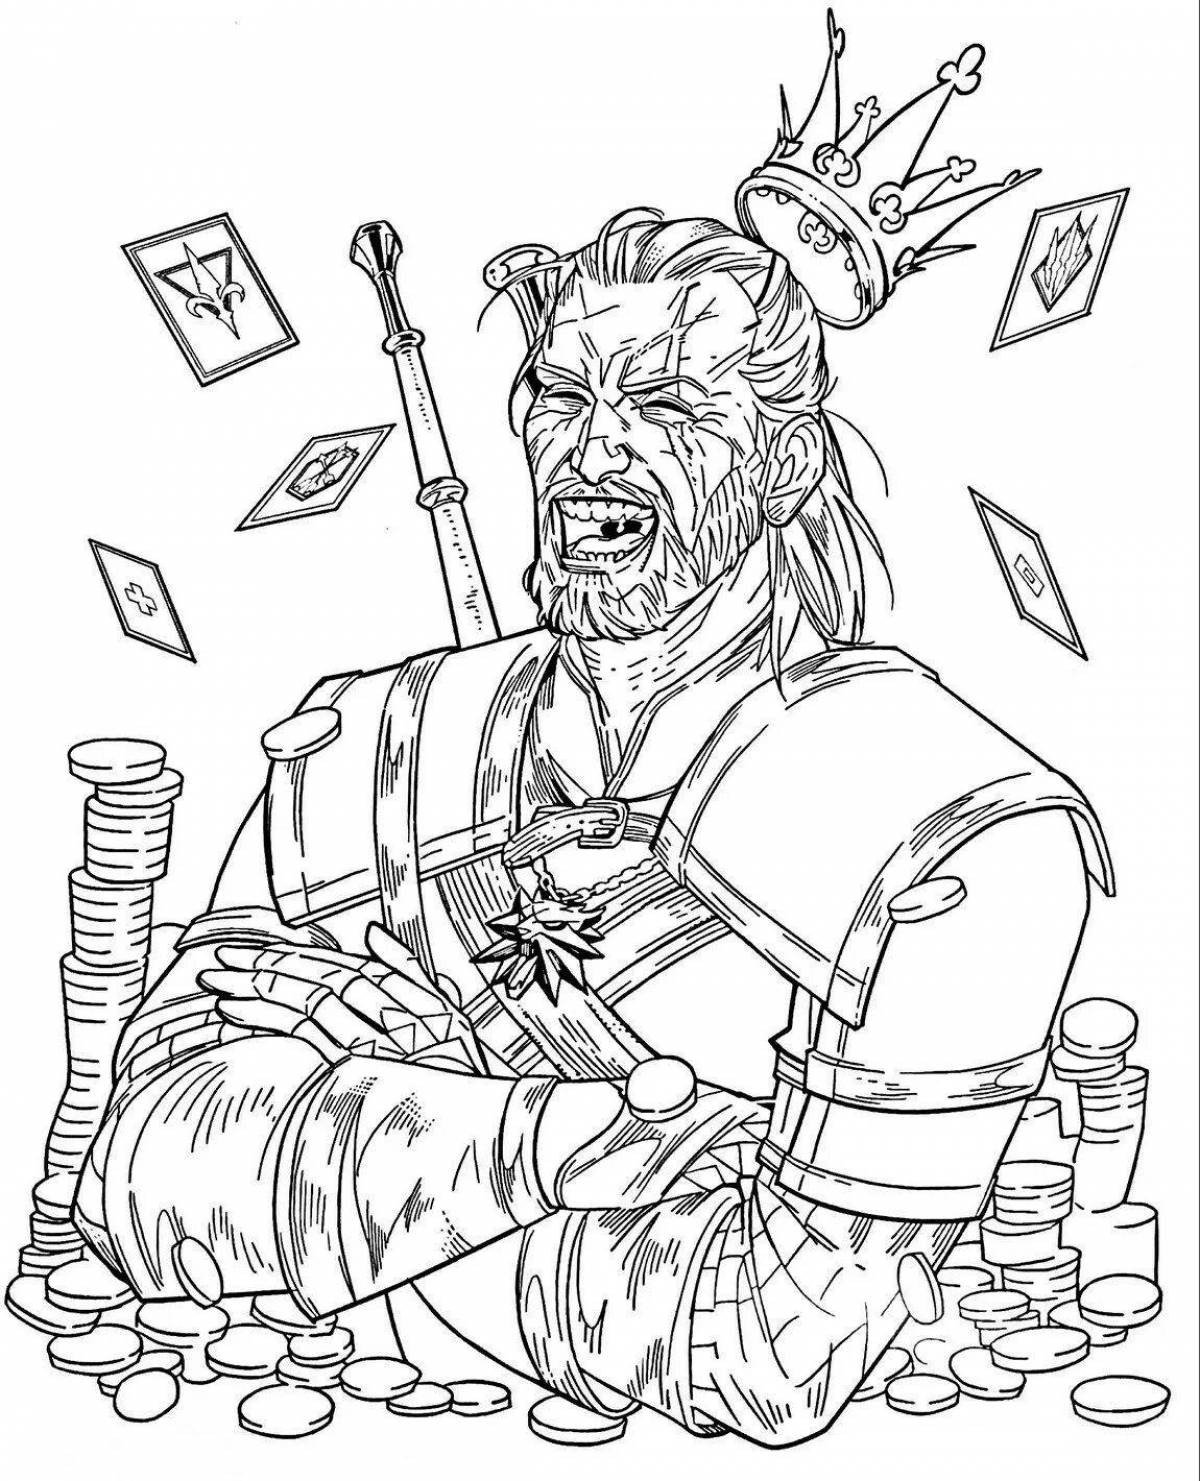 Witcher 3 educational coloring book